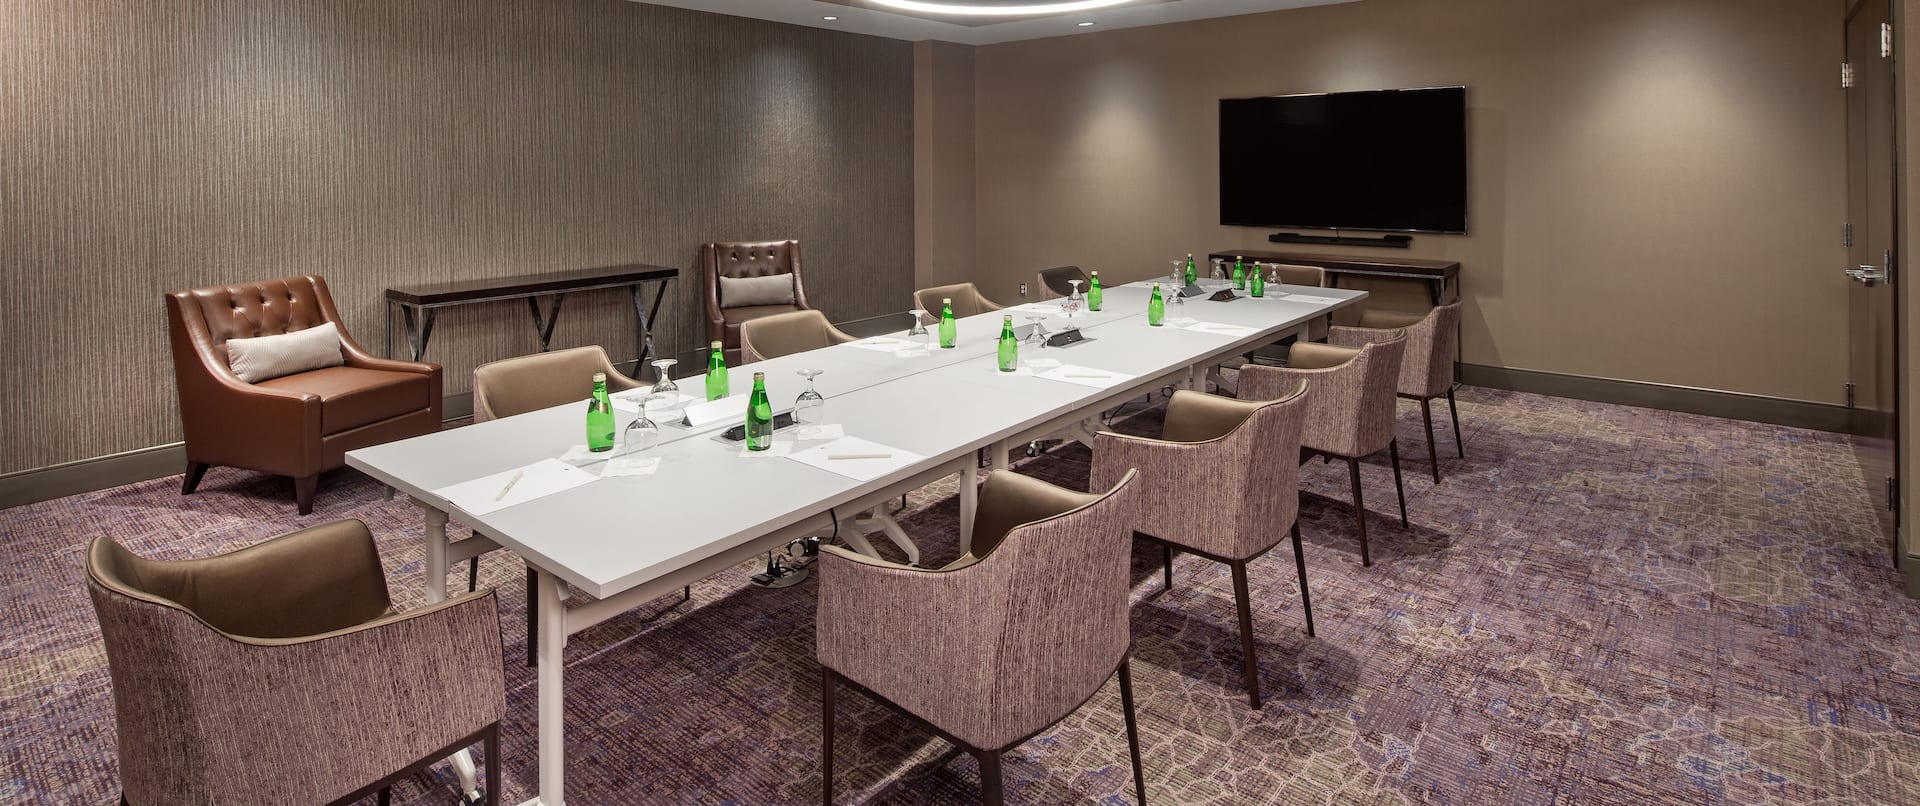 Meeting Room with Long Table, Armchairs and Wall Mounted HDTV